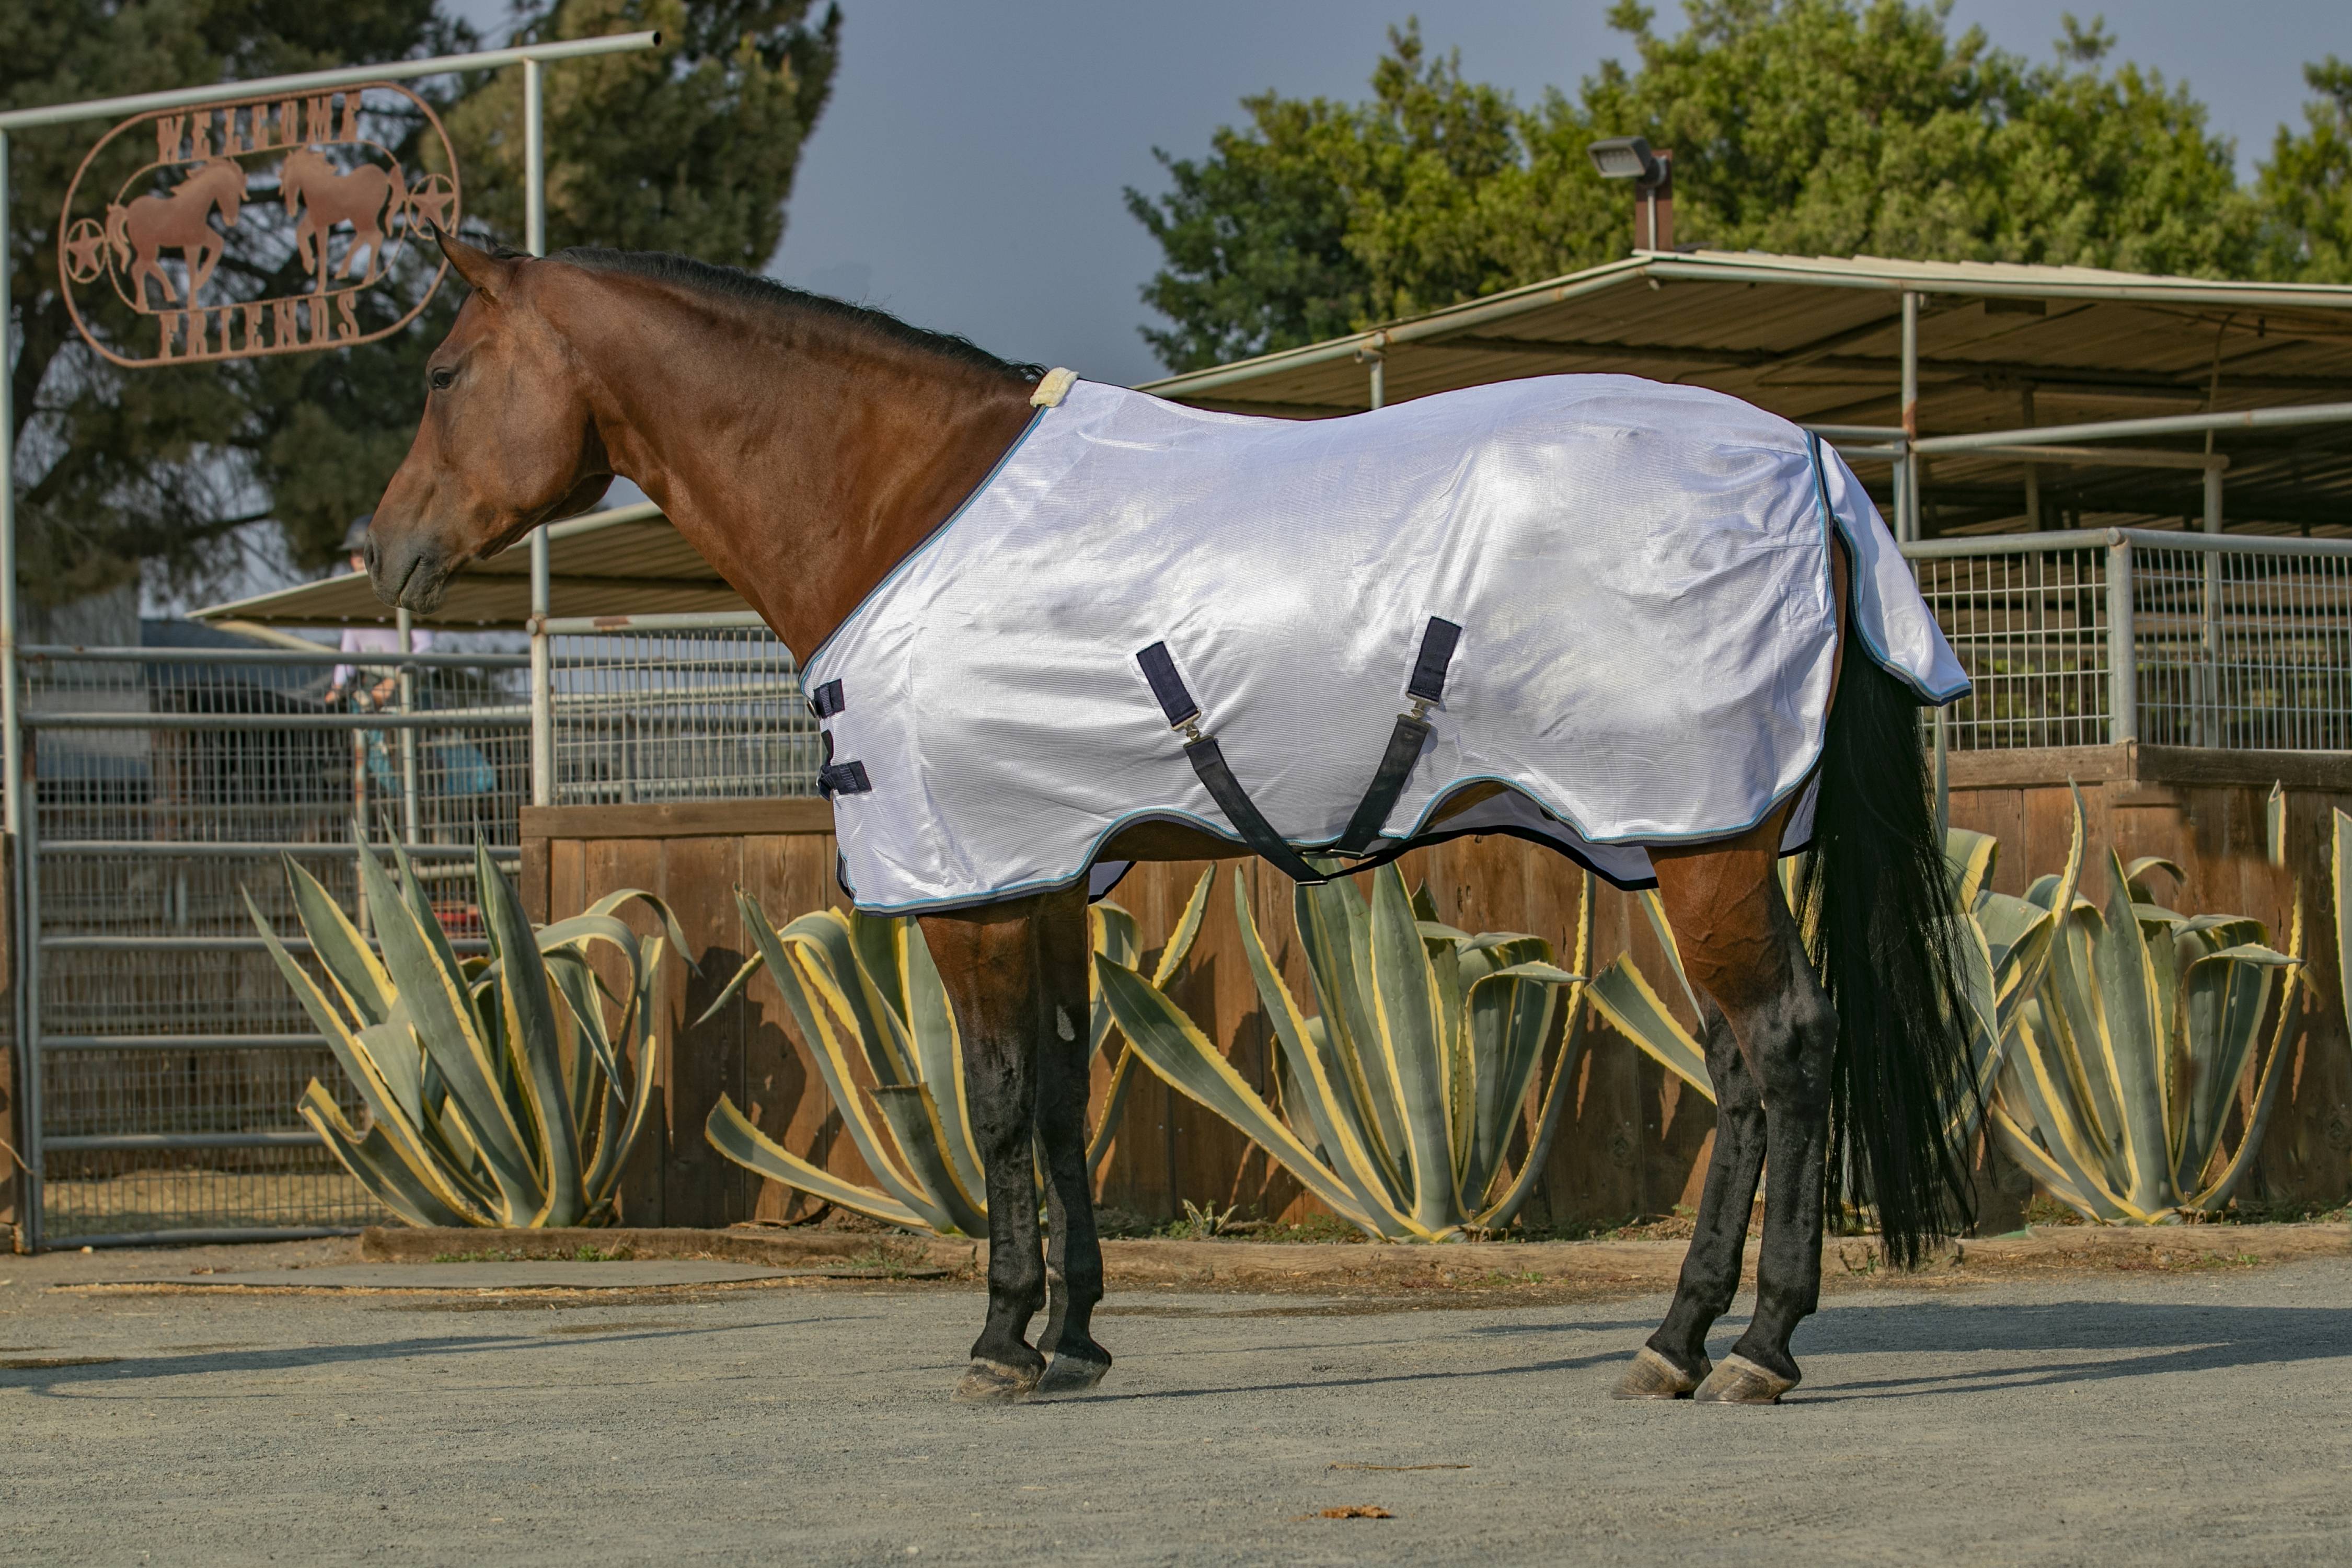 Lightweight Durable & Breathable Day Sheets Kensington Products Egyptian Cotton Horse Stable Blanket 